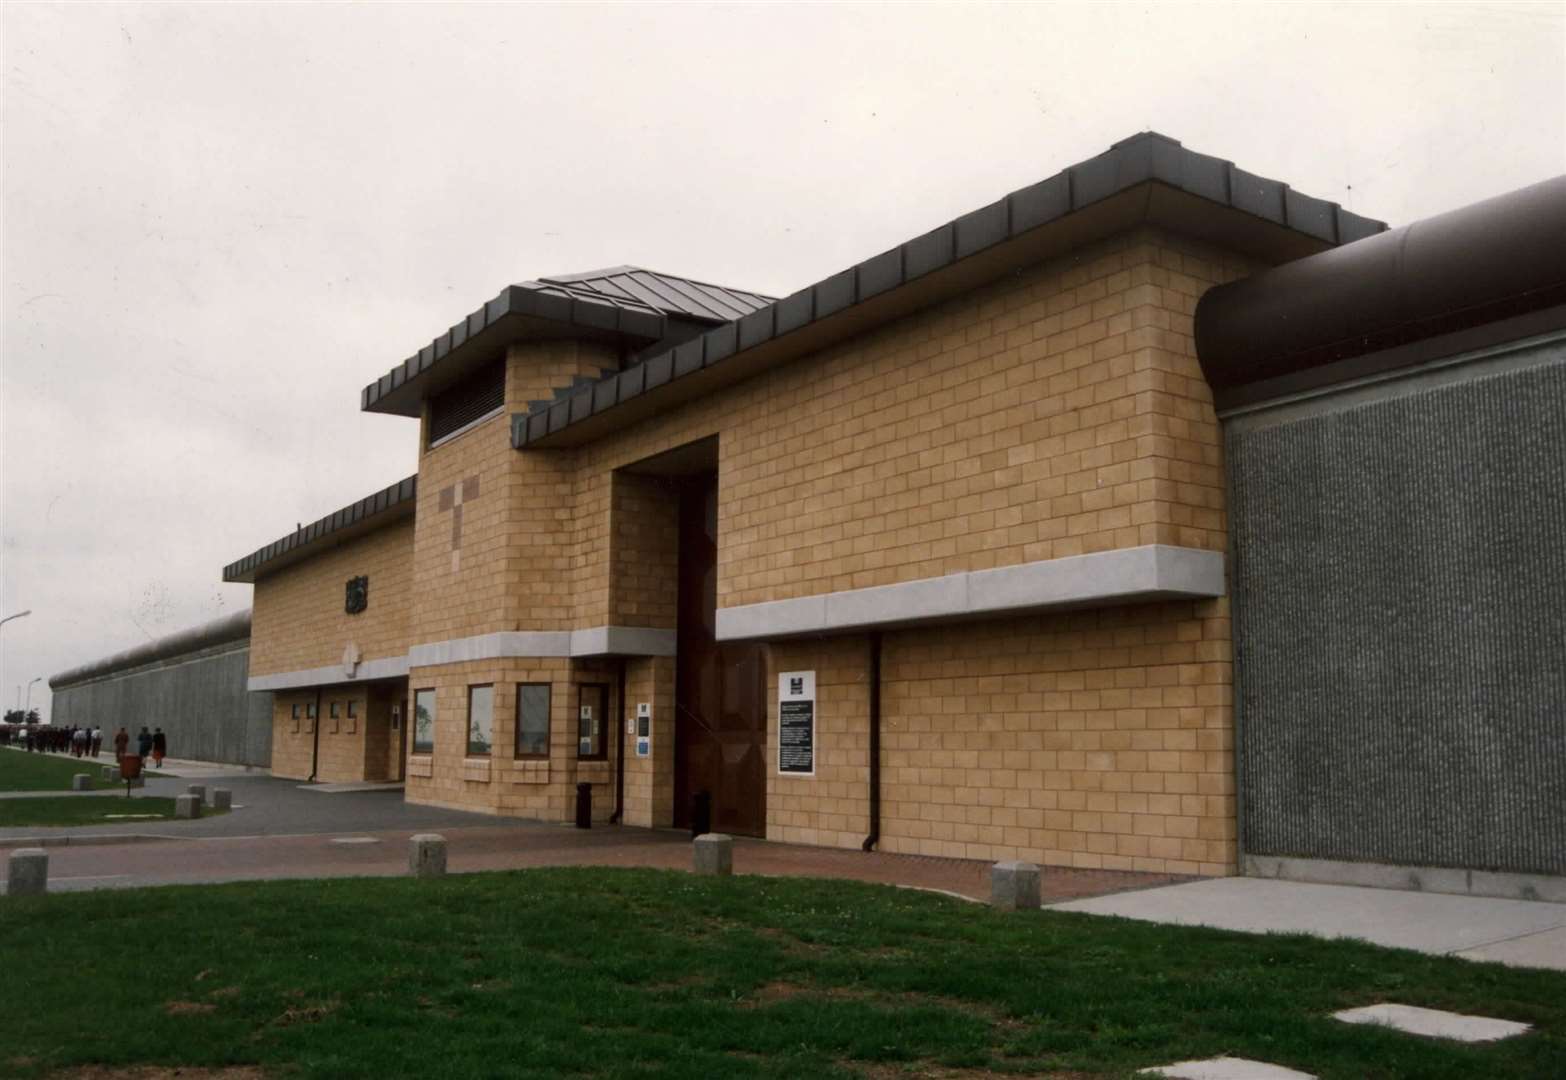 Elmley Prison in Eastchurch on the Isle of Sheppey